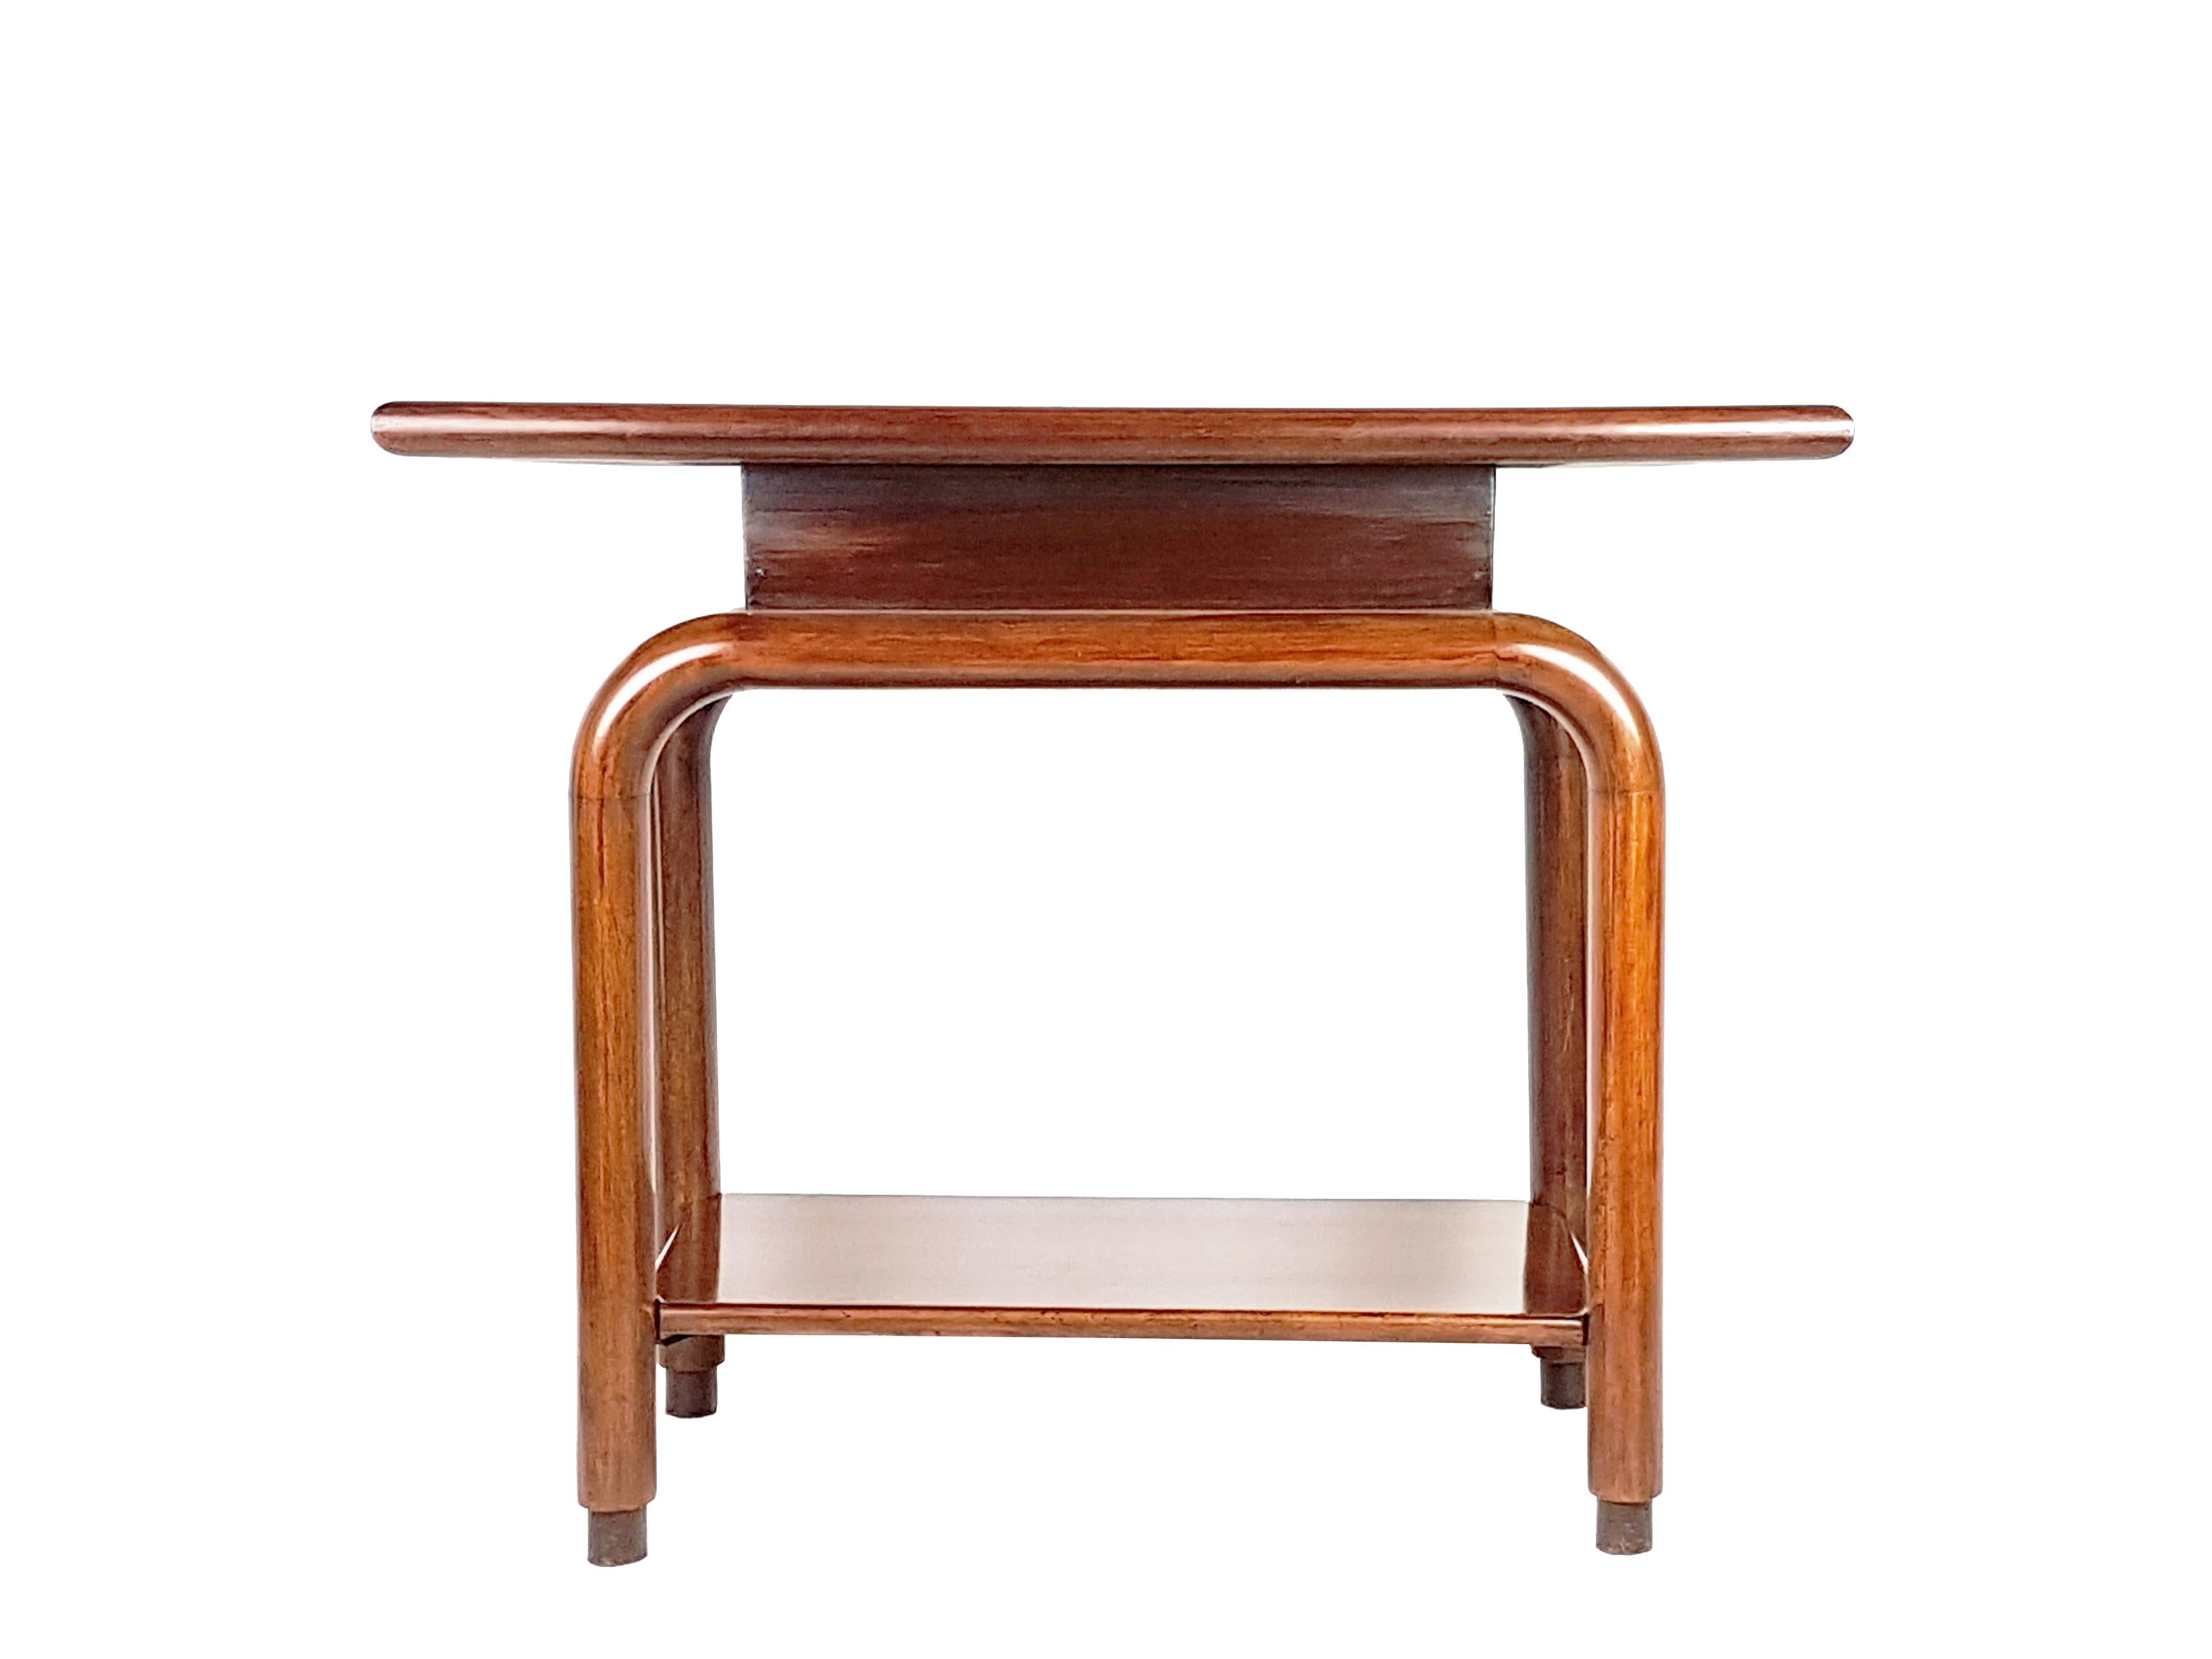 Mid-20th Century Italian Wooden 1930s Deco Low Table with Shaped Legs